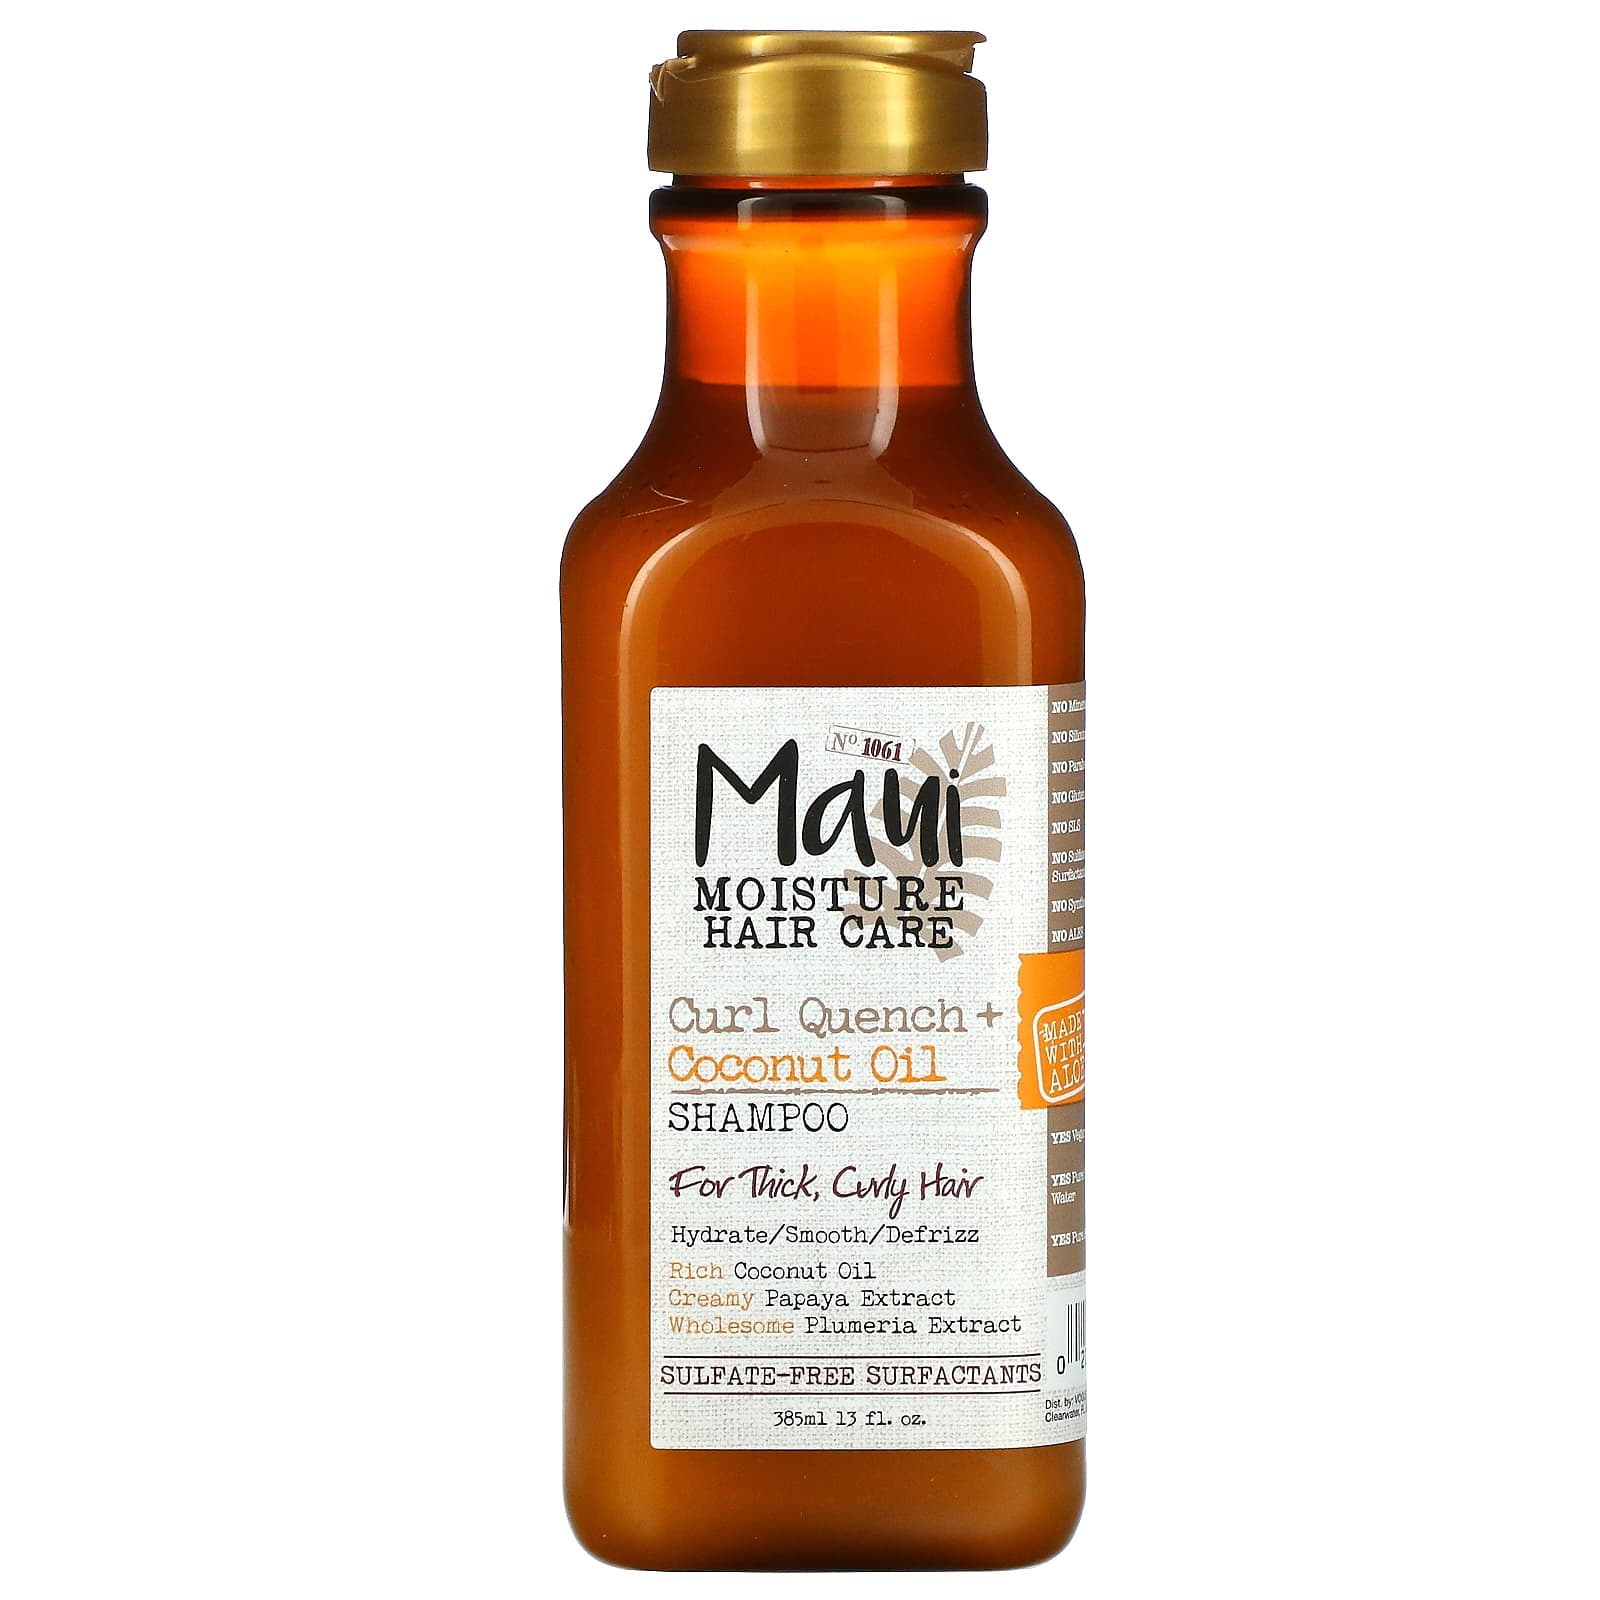 Maui Curl Quench + Coconut Oil, For Thick, Curly Hair, 13 fl oz ml)